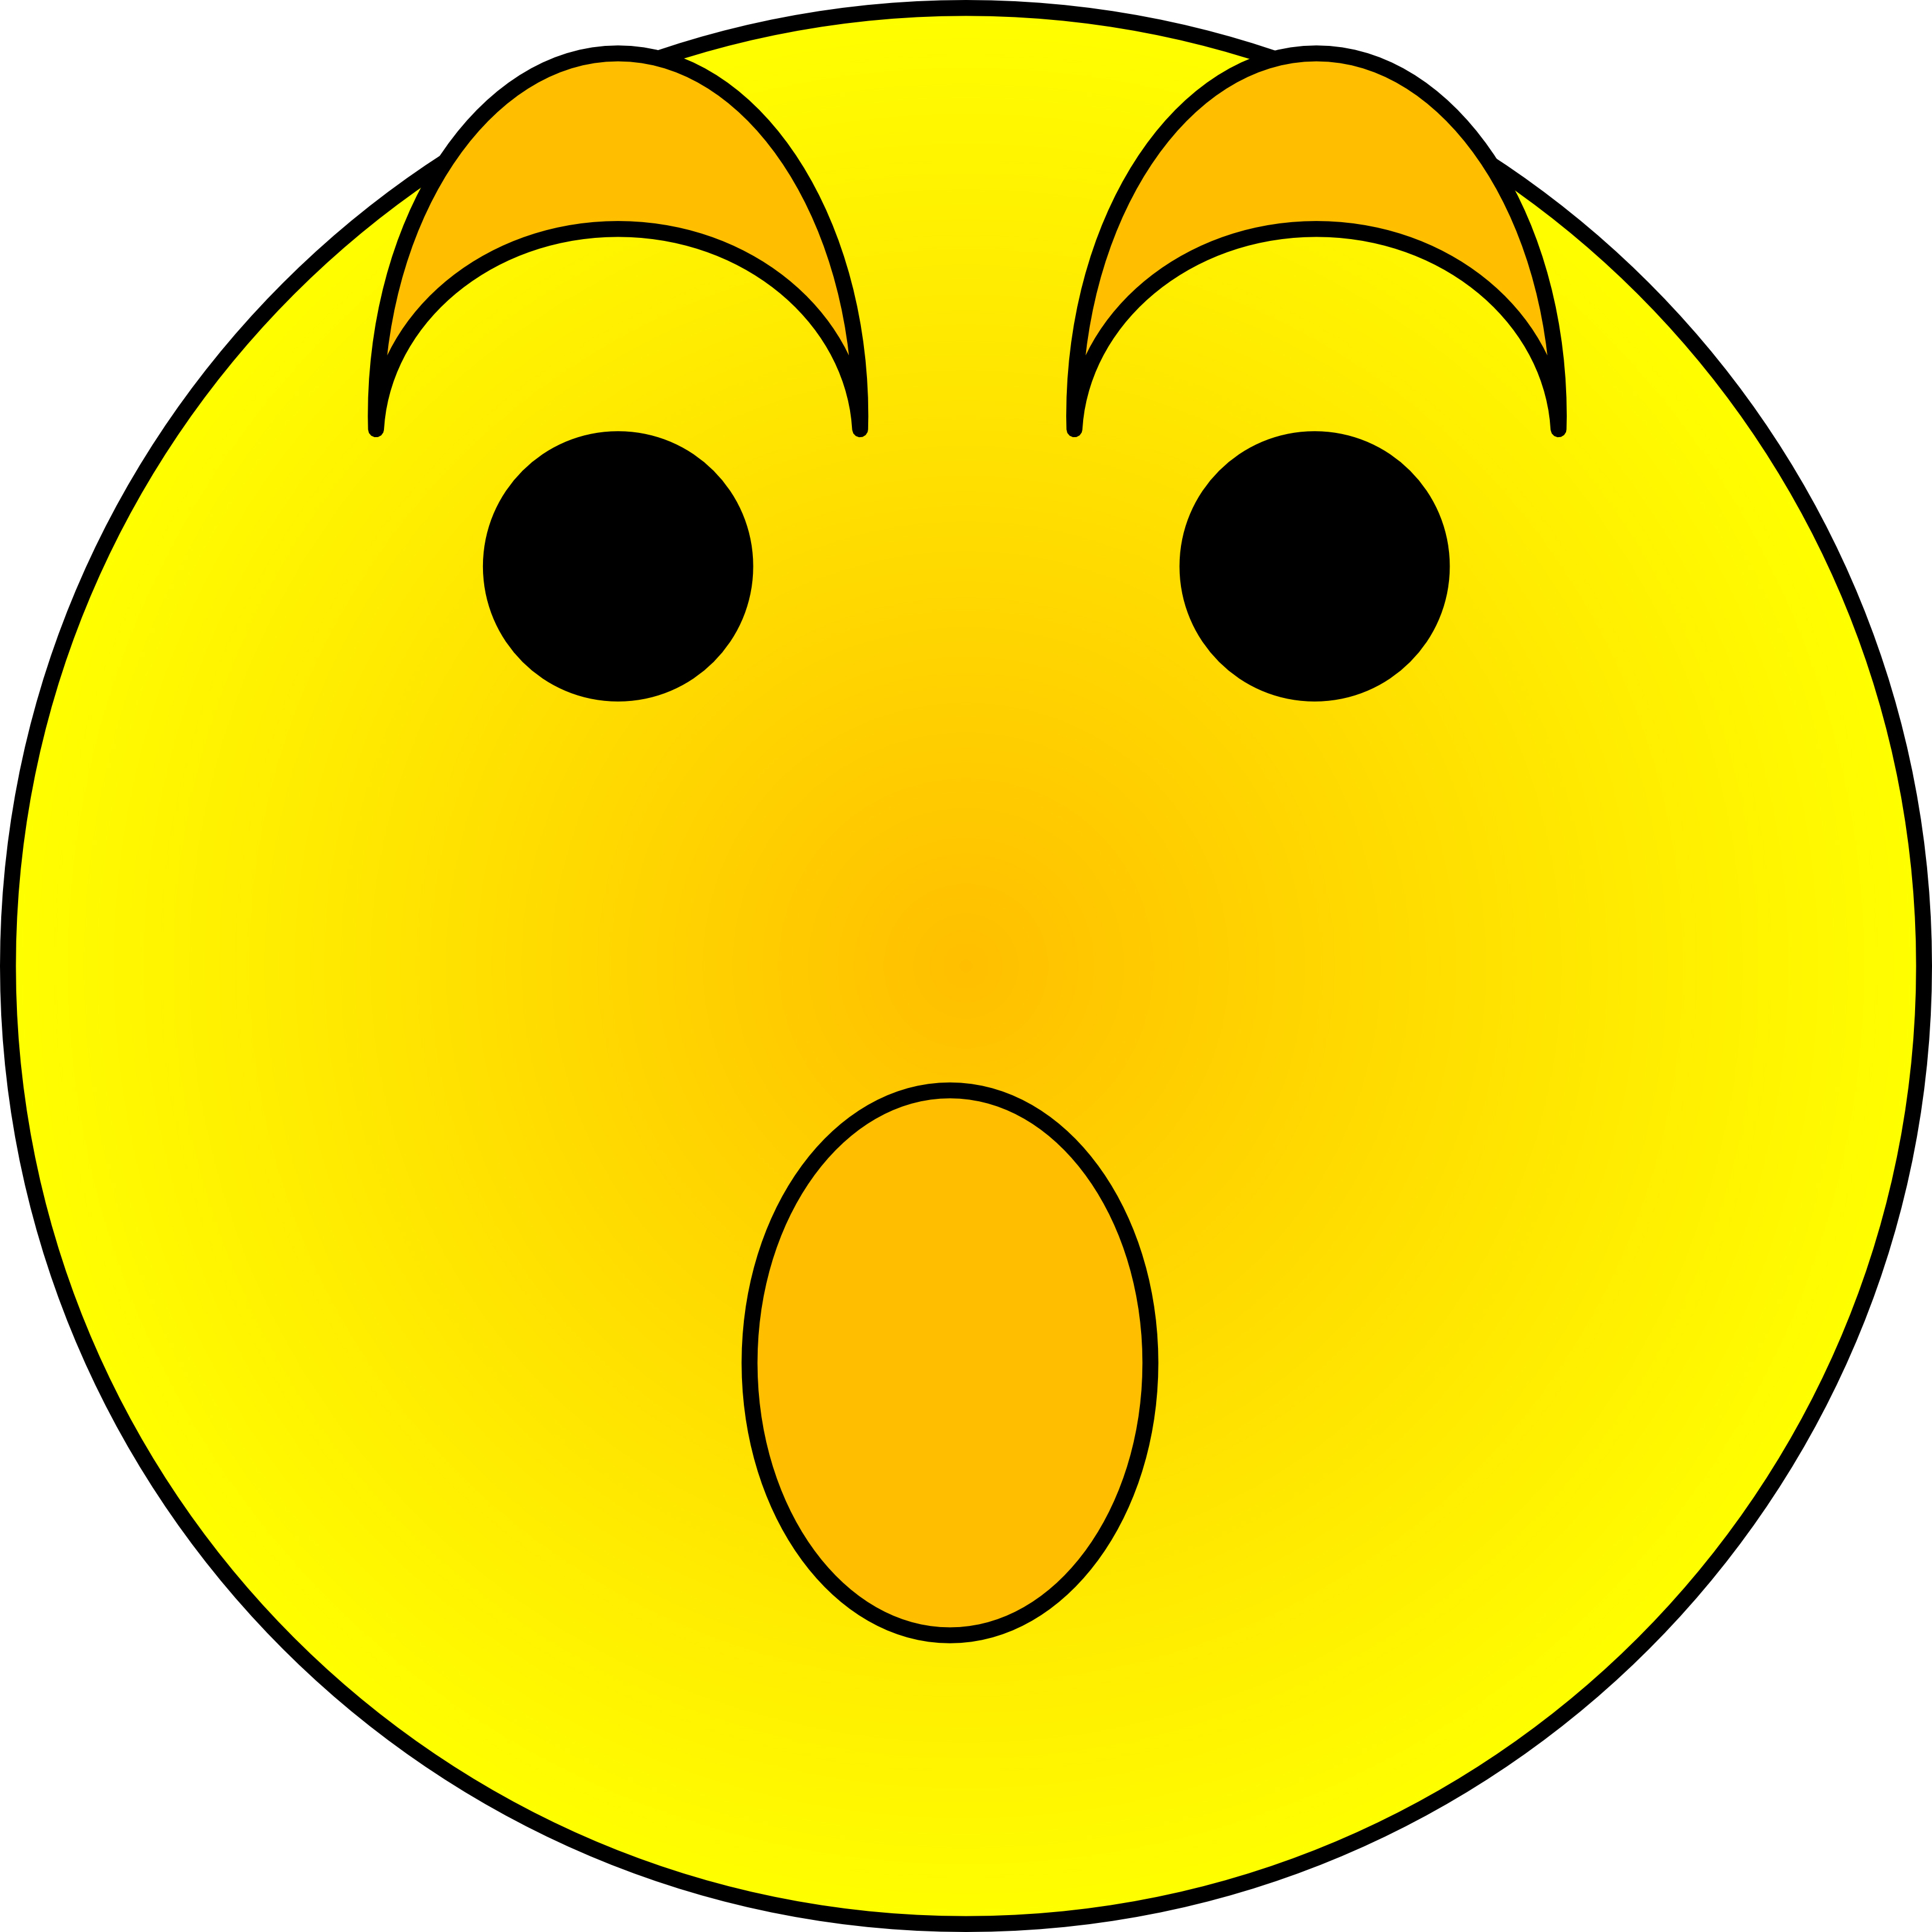 44 images of Surprised Face Cartoon . You can use these free cliparts ...